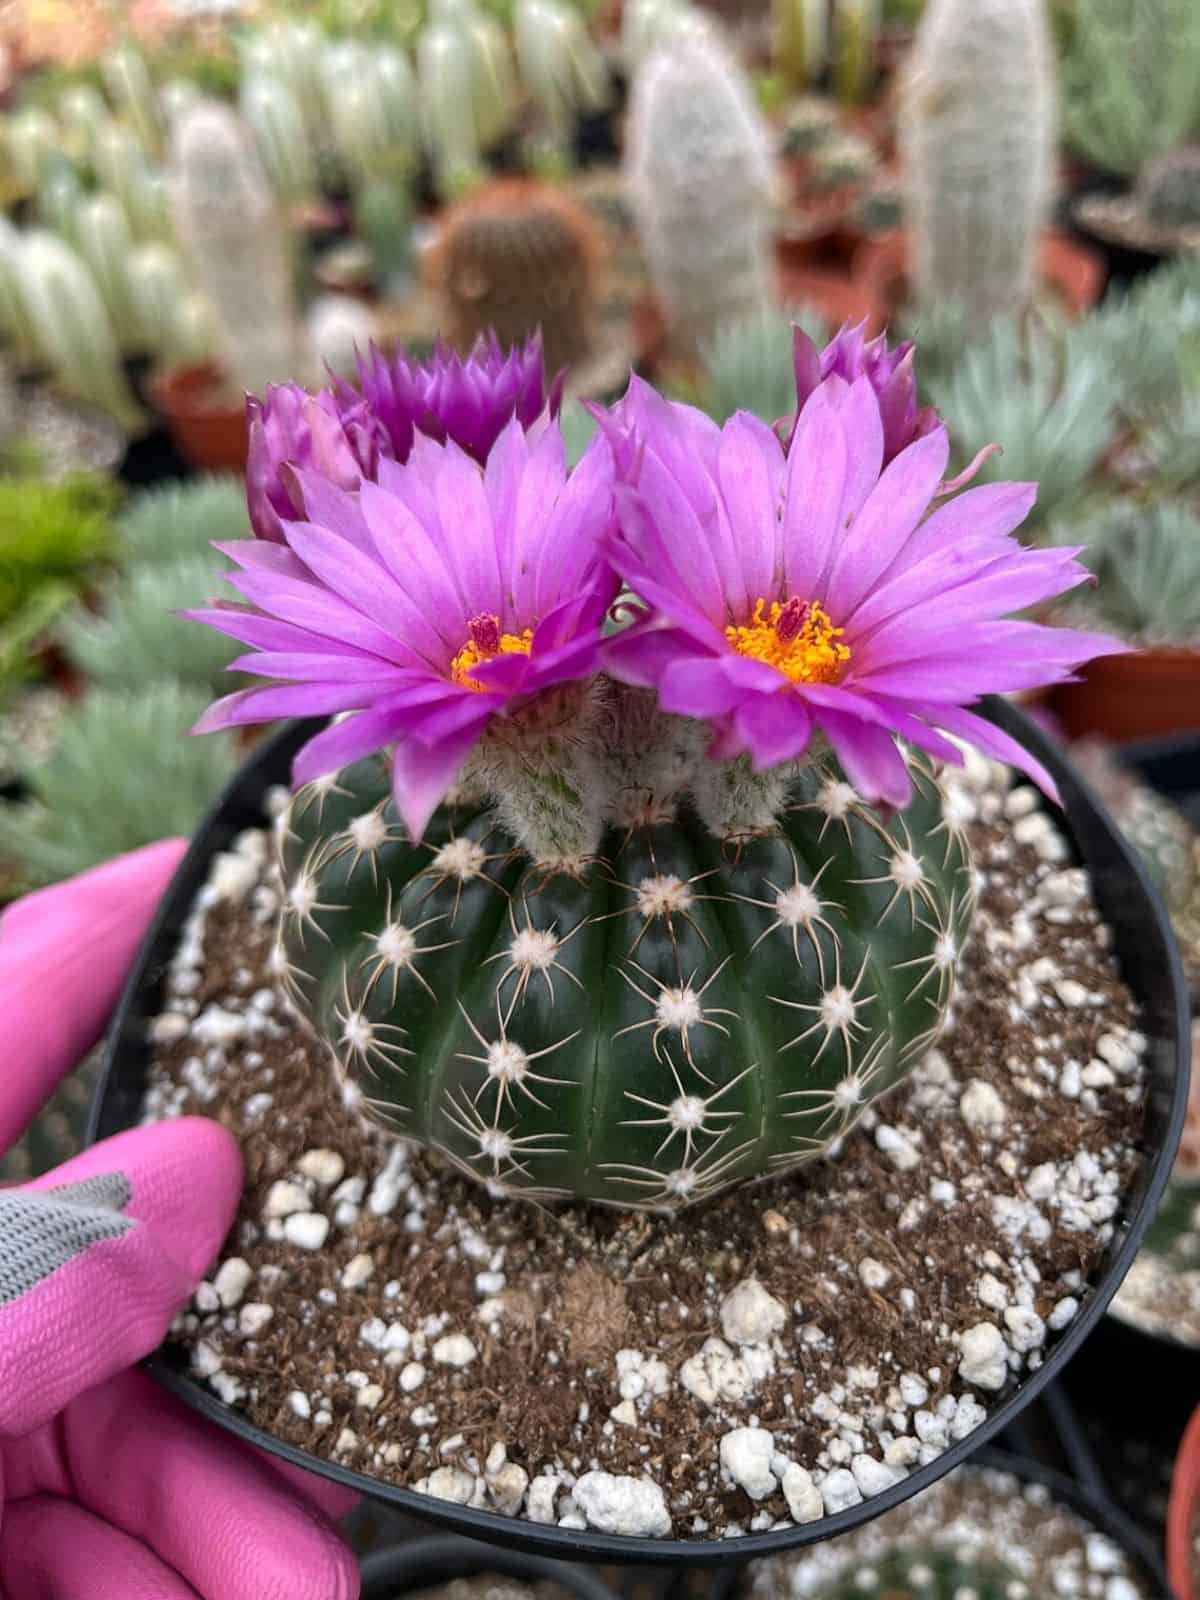 Notocactus Uebelmannianus with beautiful purple flowers grows in a plastic pot held by hand.